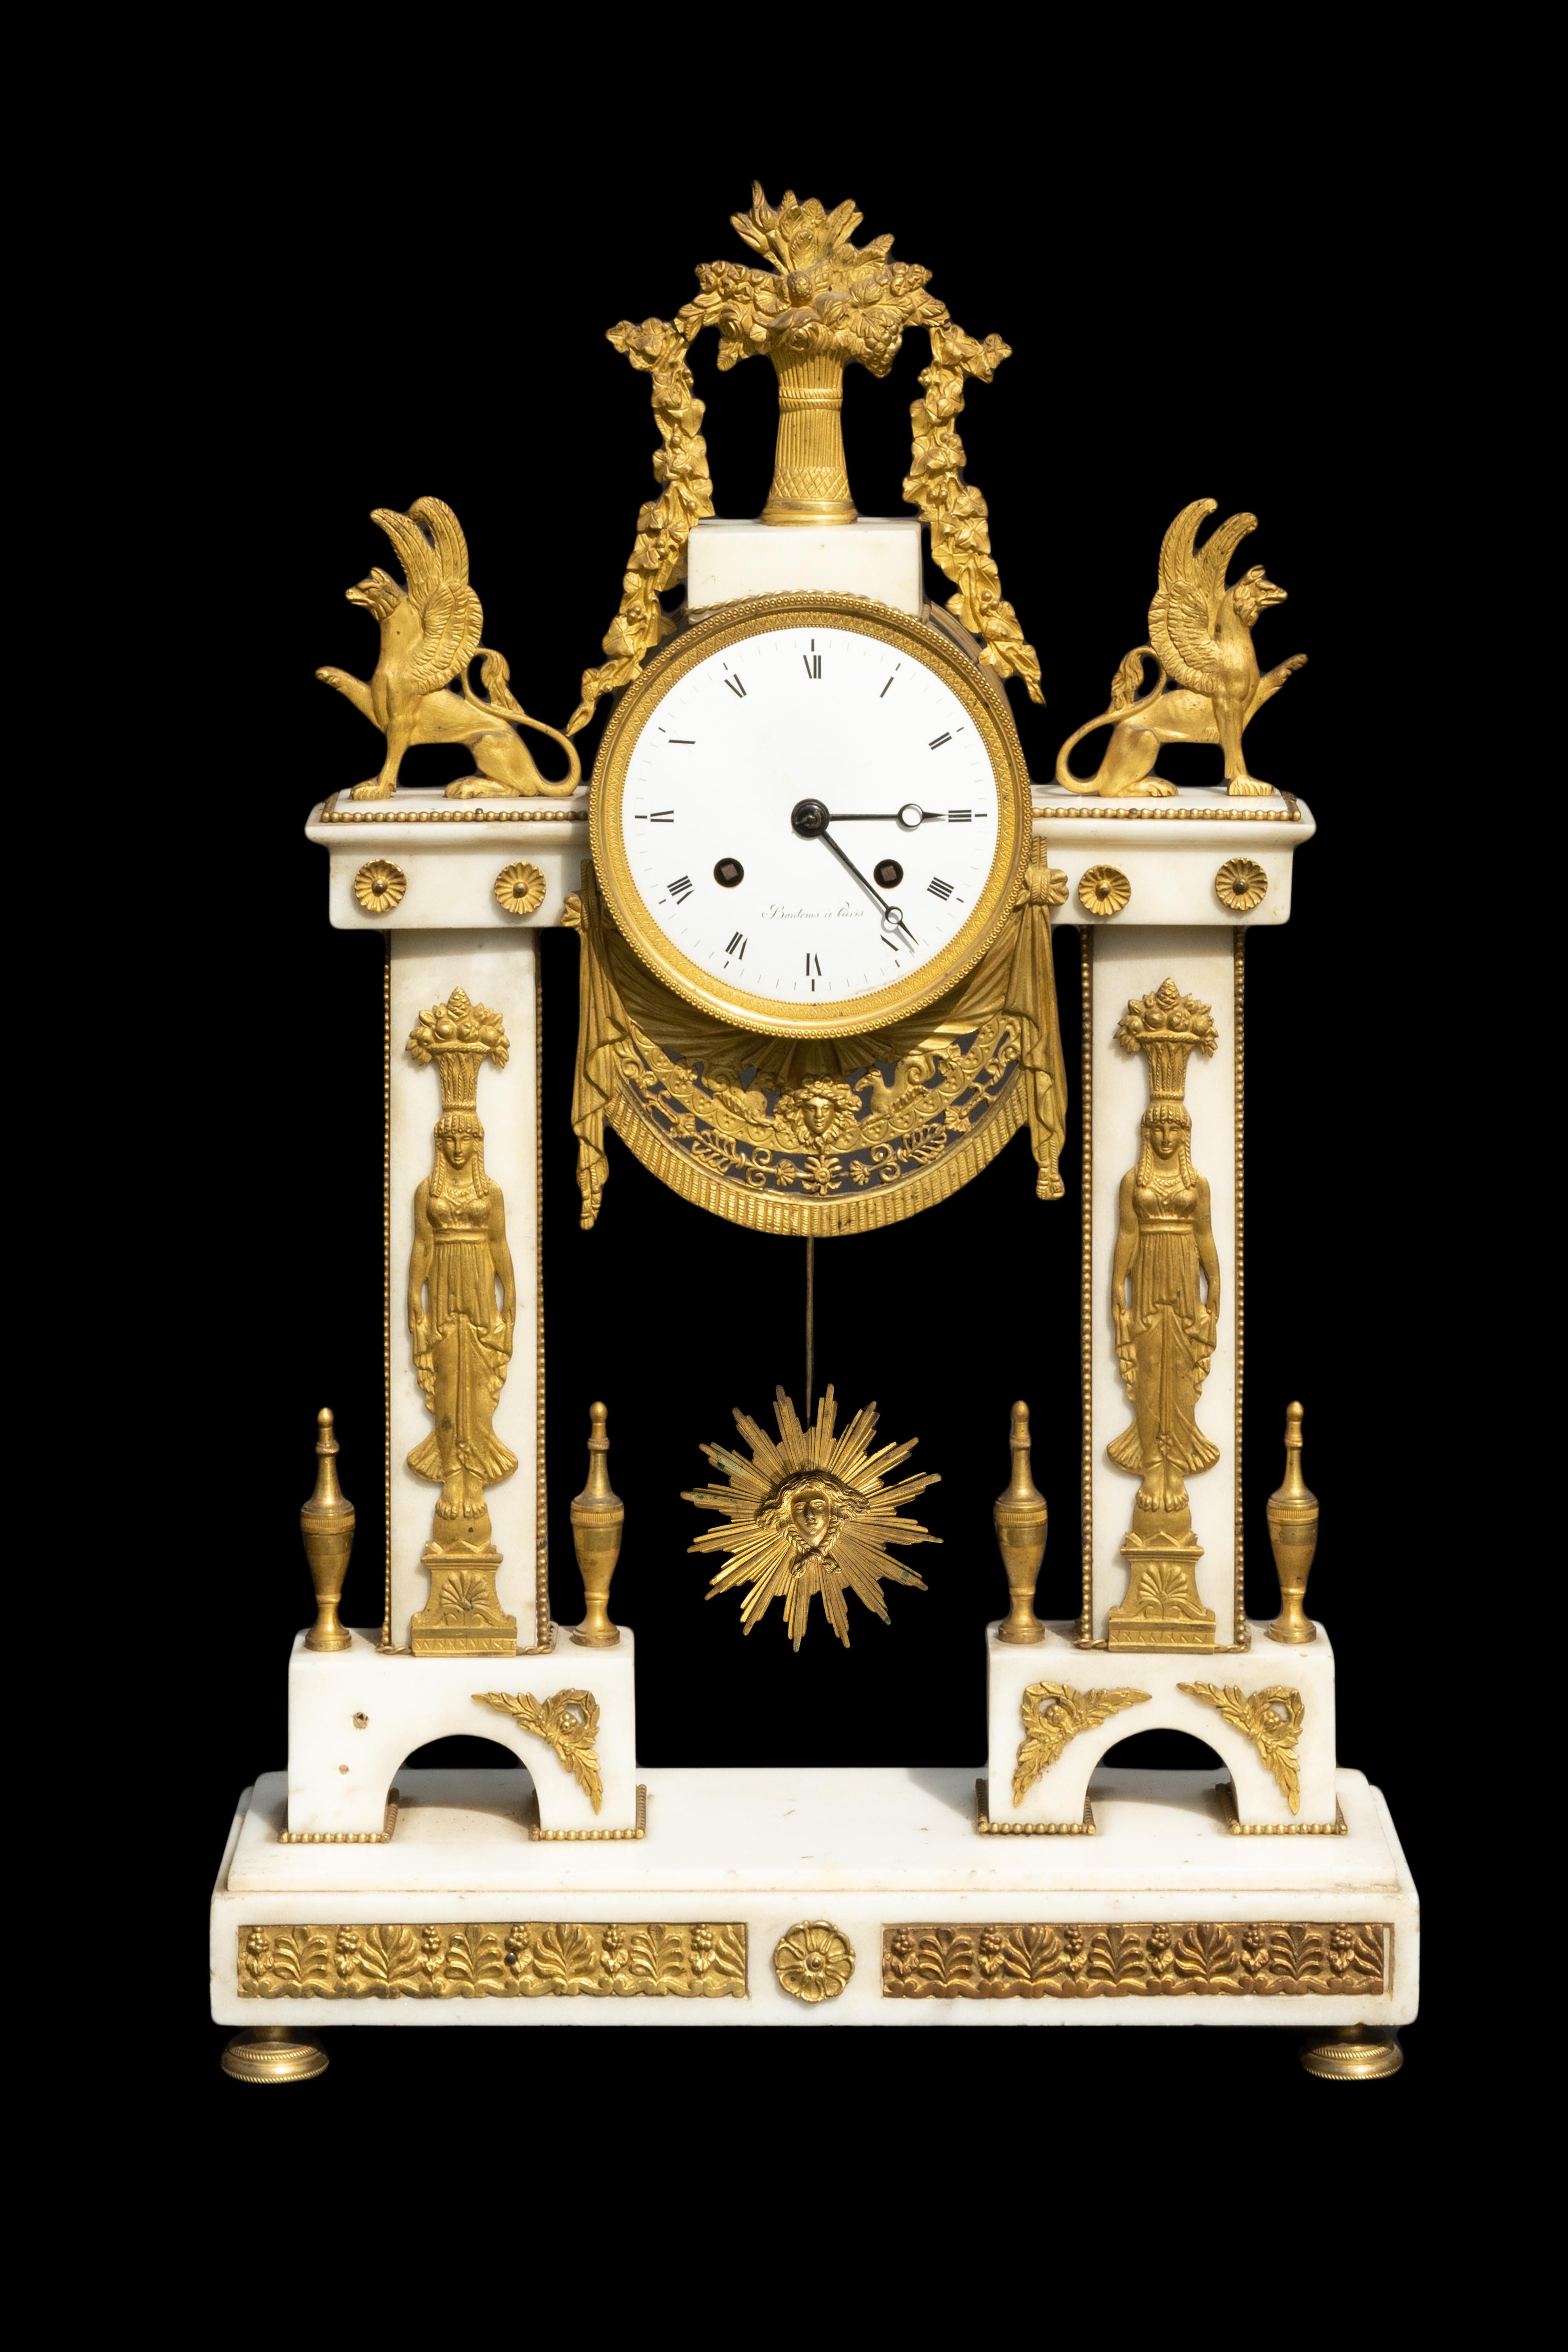 Bronze and marble mantel clock from 18th century signed De Bontems a Pairs:

Measures: 13.5